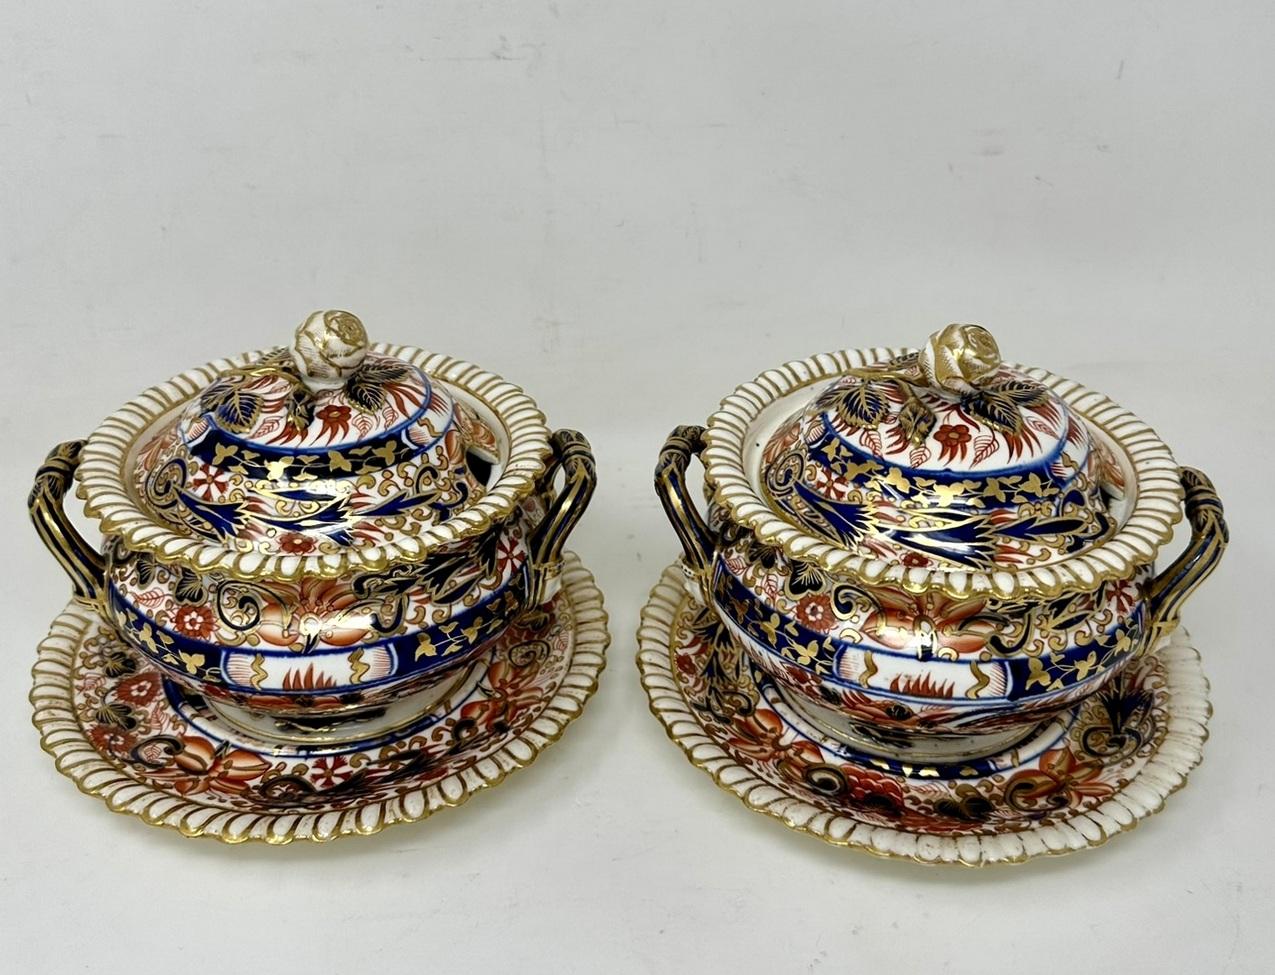 Antique English Crown Derby Pair Sauce Soup Tureens Urns Vases Centerpieces 19C  In Good Condition For Sale In Dublin, Ireland